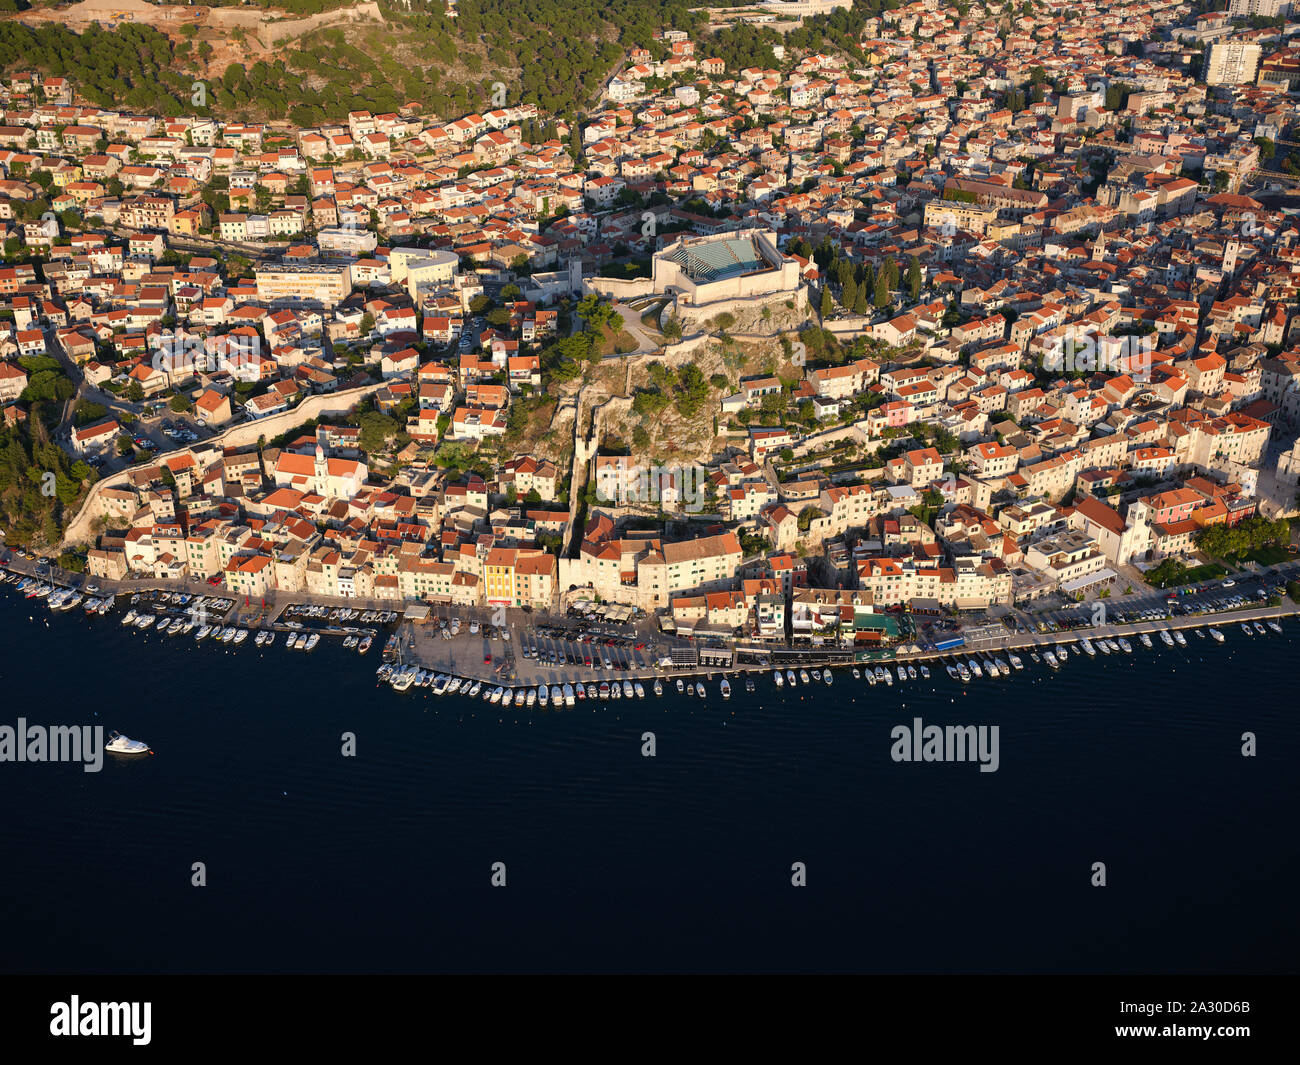 AERIAL VIEW. Medieval hilltop town of Šibenik crowned with St. Michael's Fortress. Dalmatia, Croatia. Stock Photo